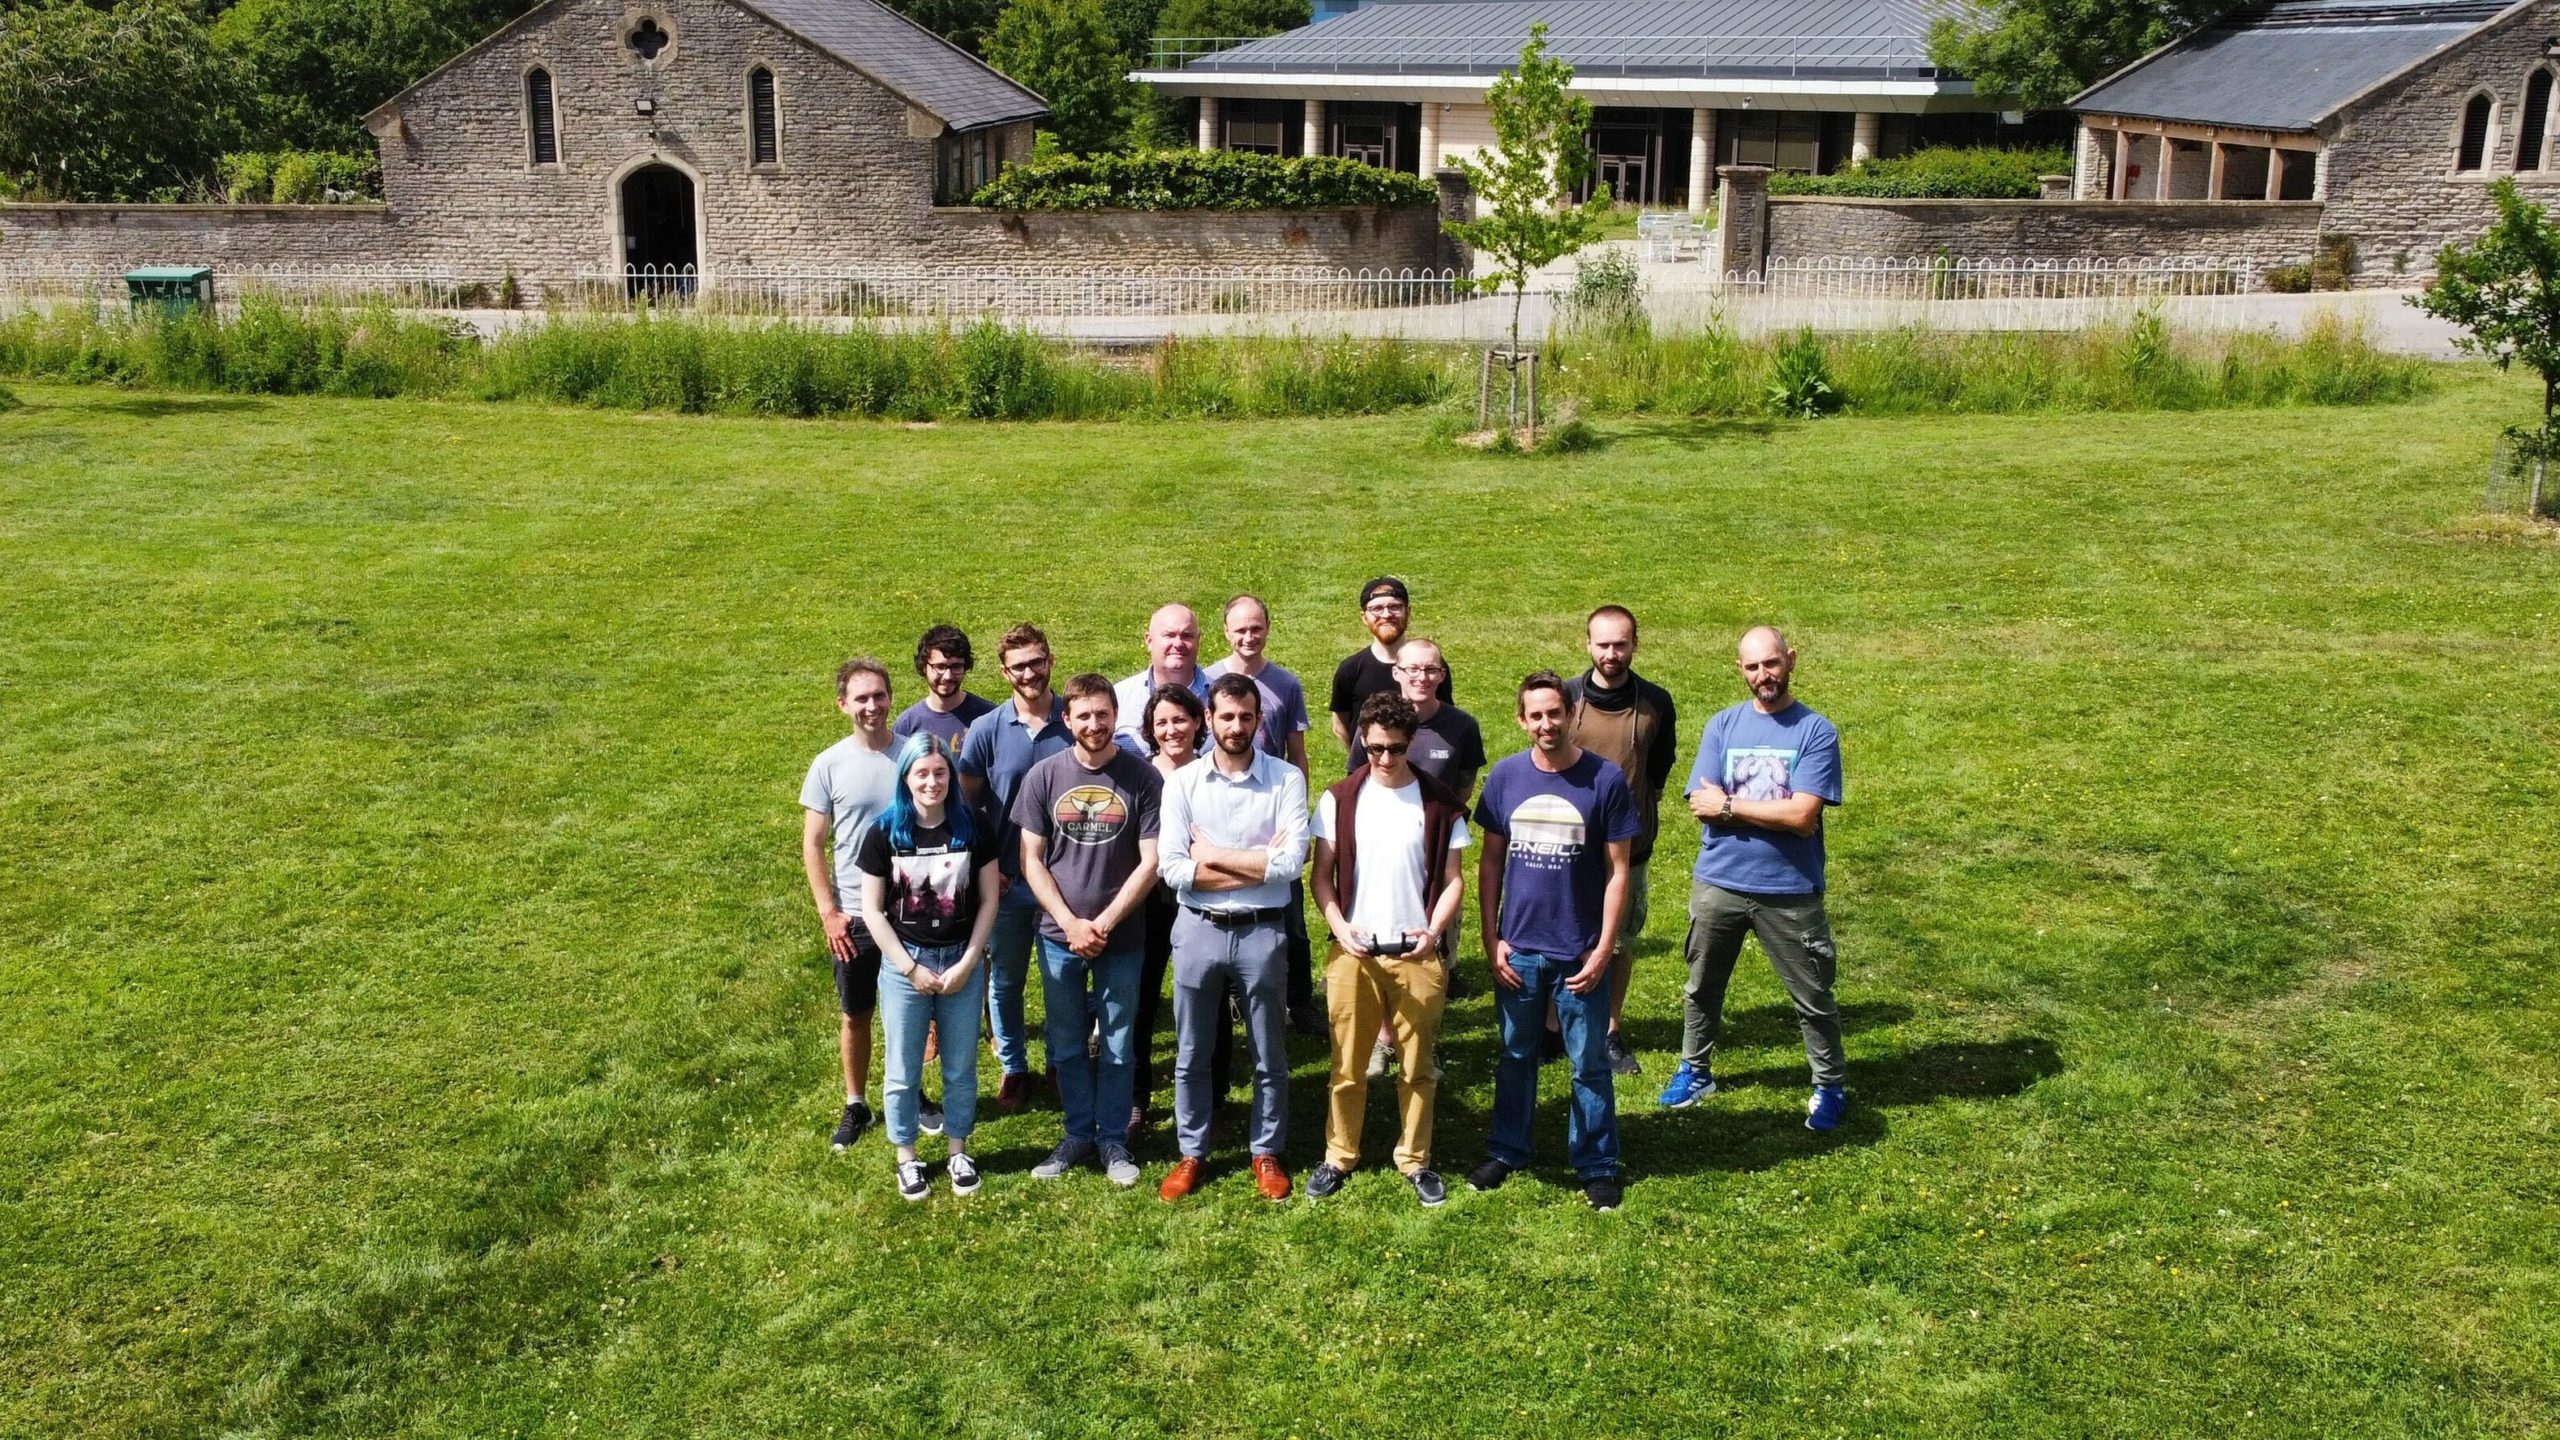 A picture of the Perceptual Robotics' team standing together